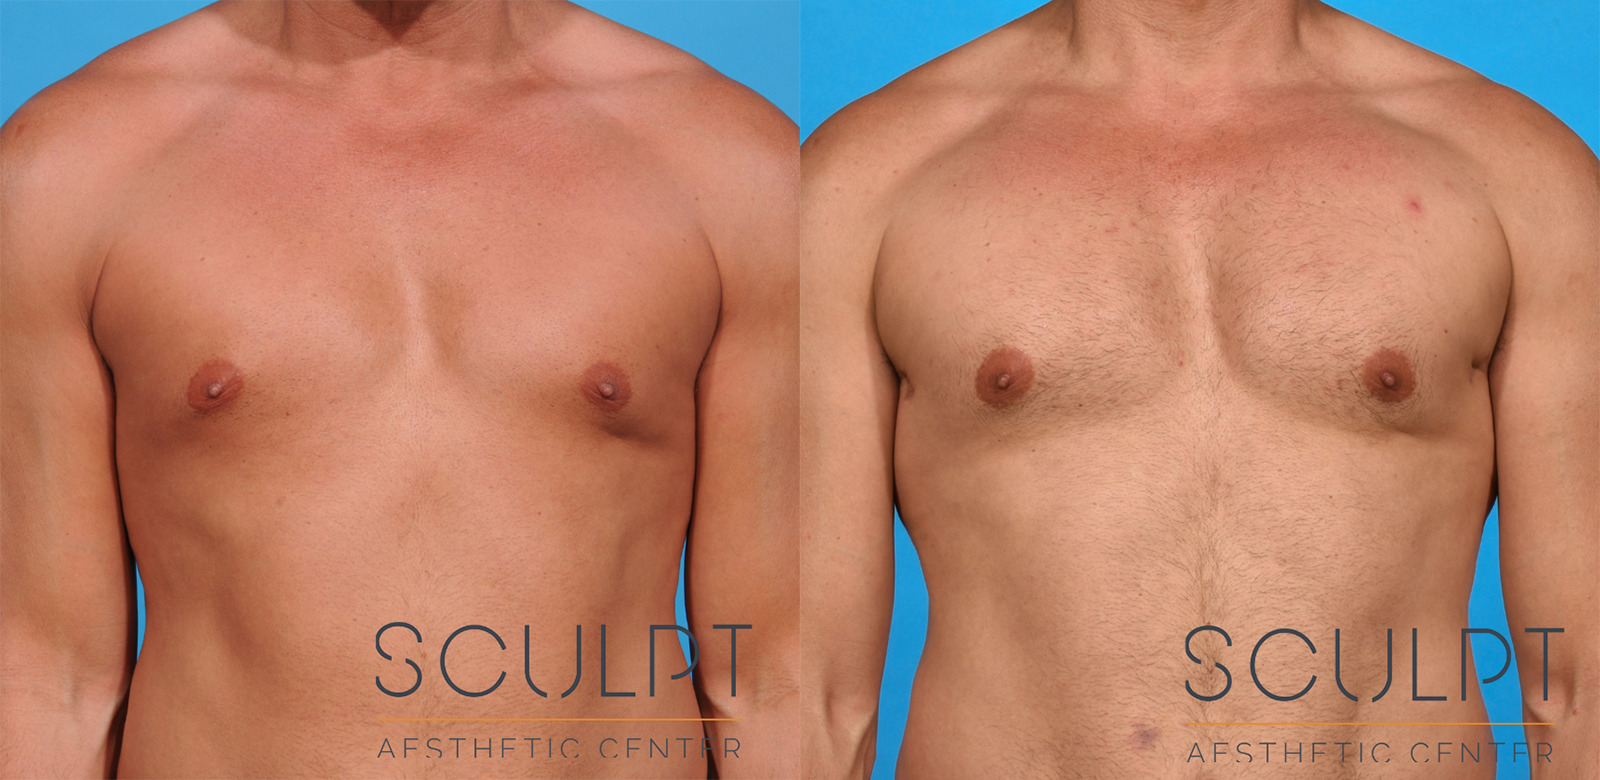 Male Pectoral Implants Before and After Photo by Sculpt Aesthetic Center in Frisco, TX